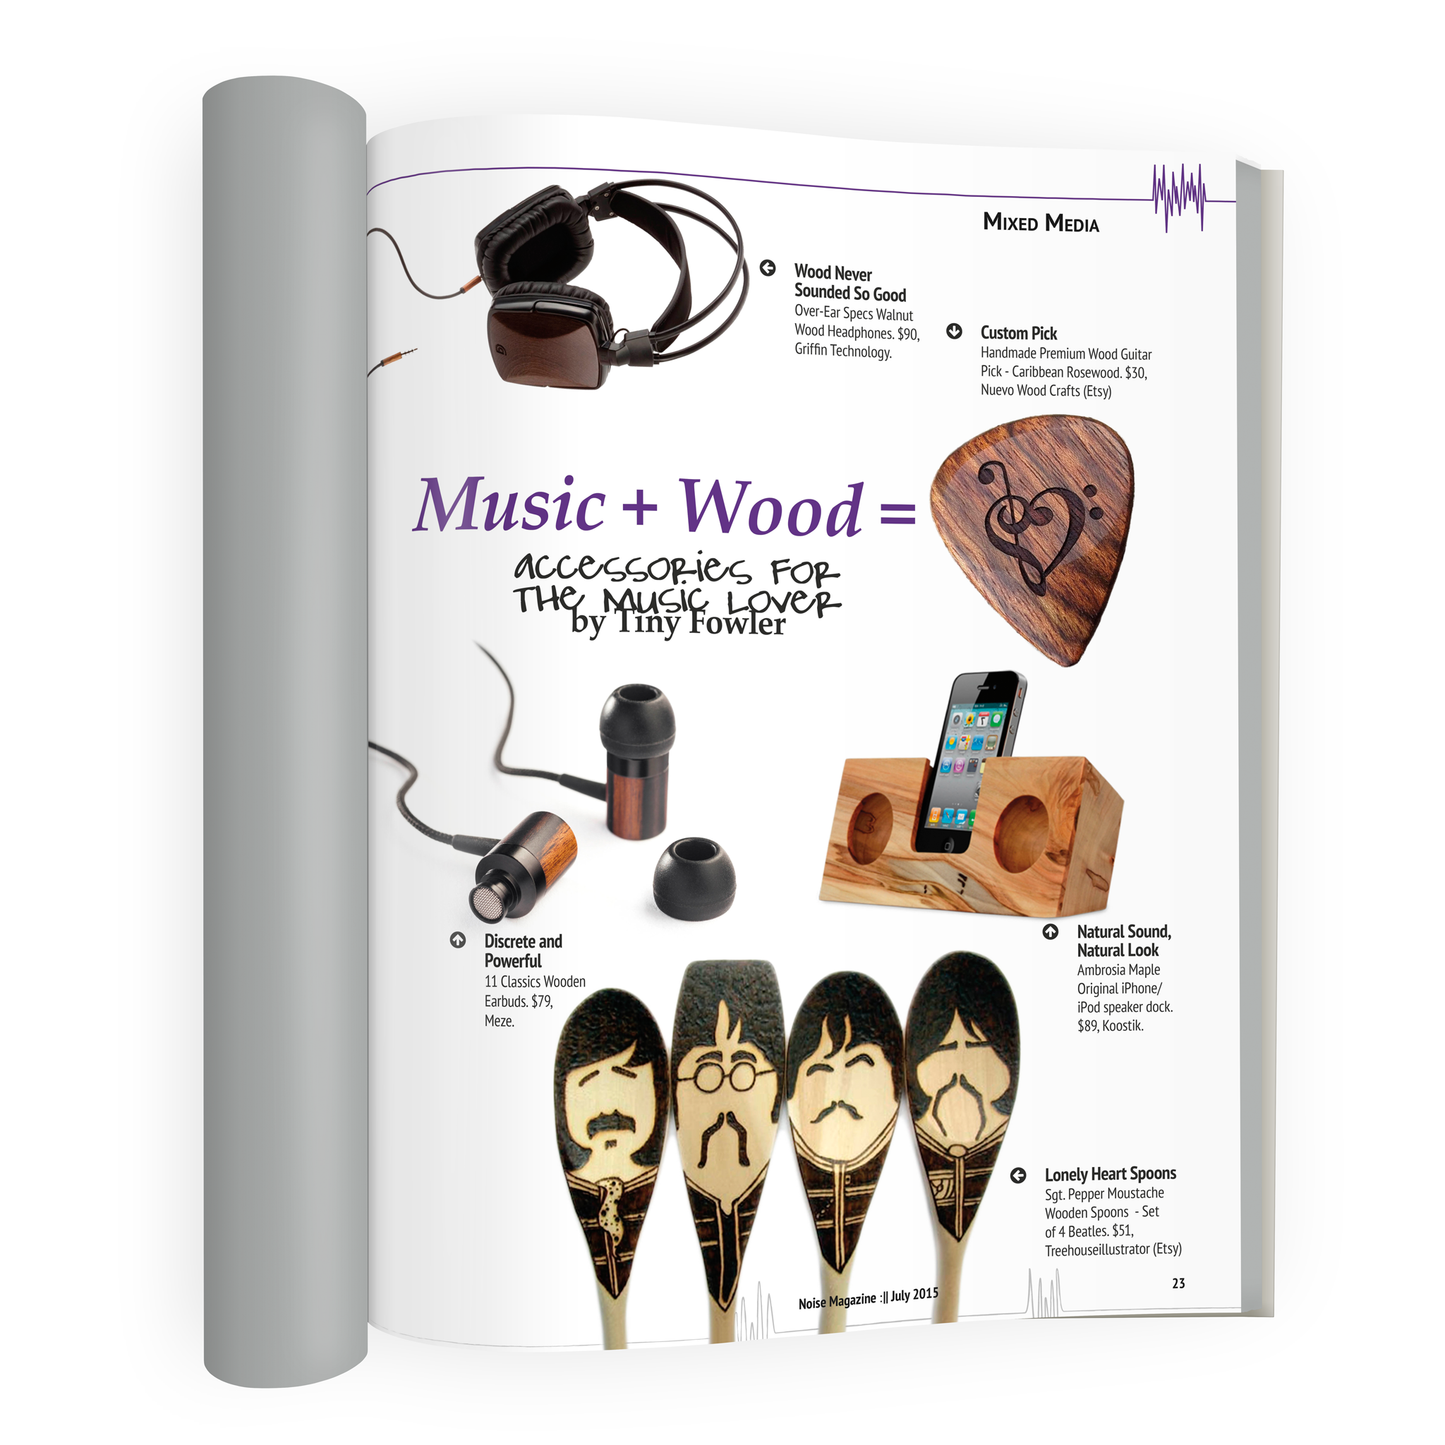 Mockup of magazine page with accessories for music lovers